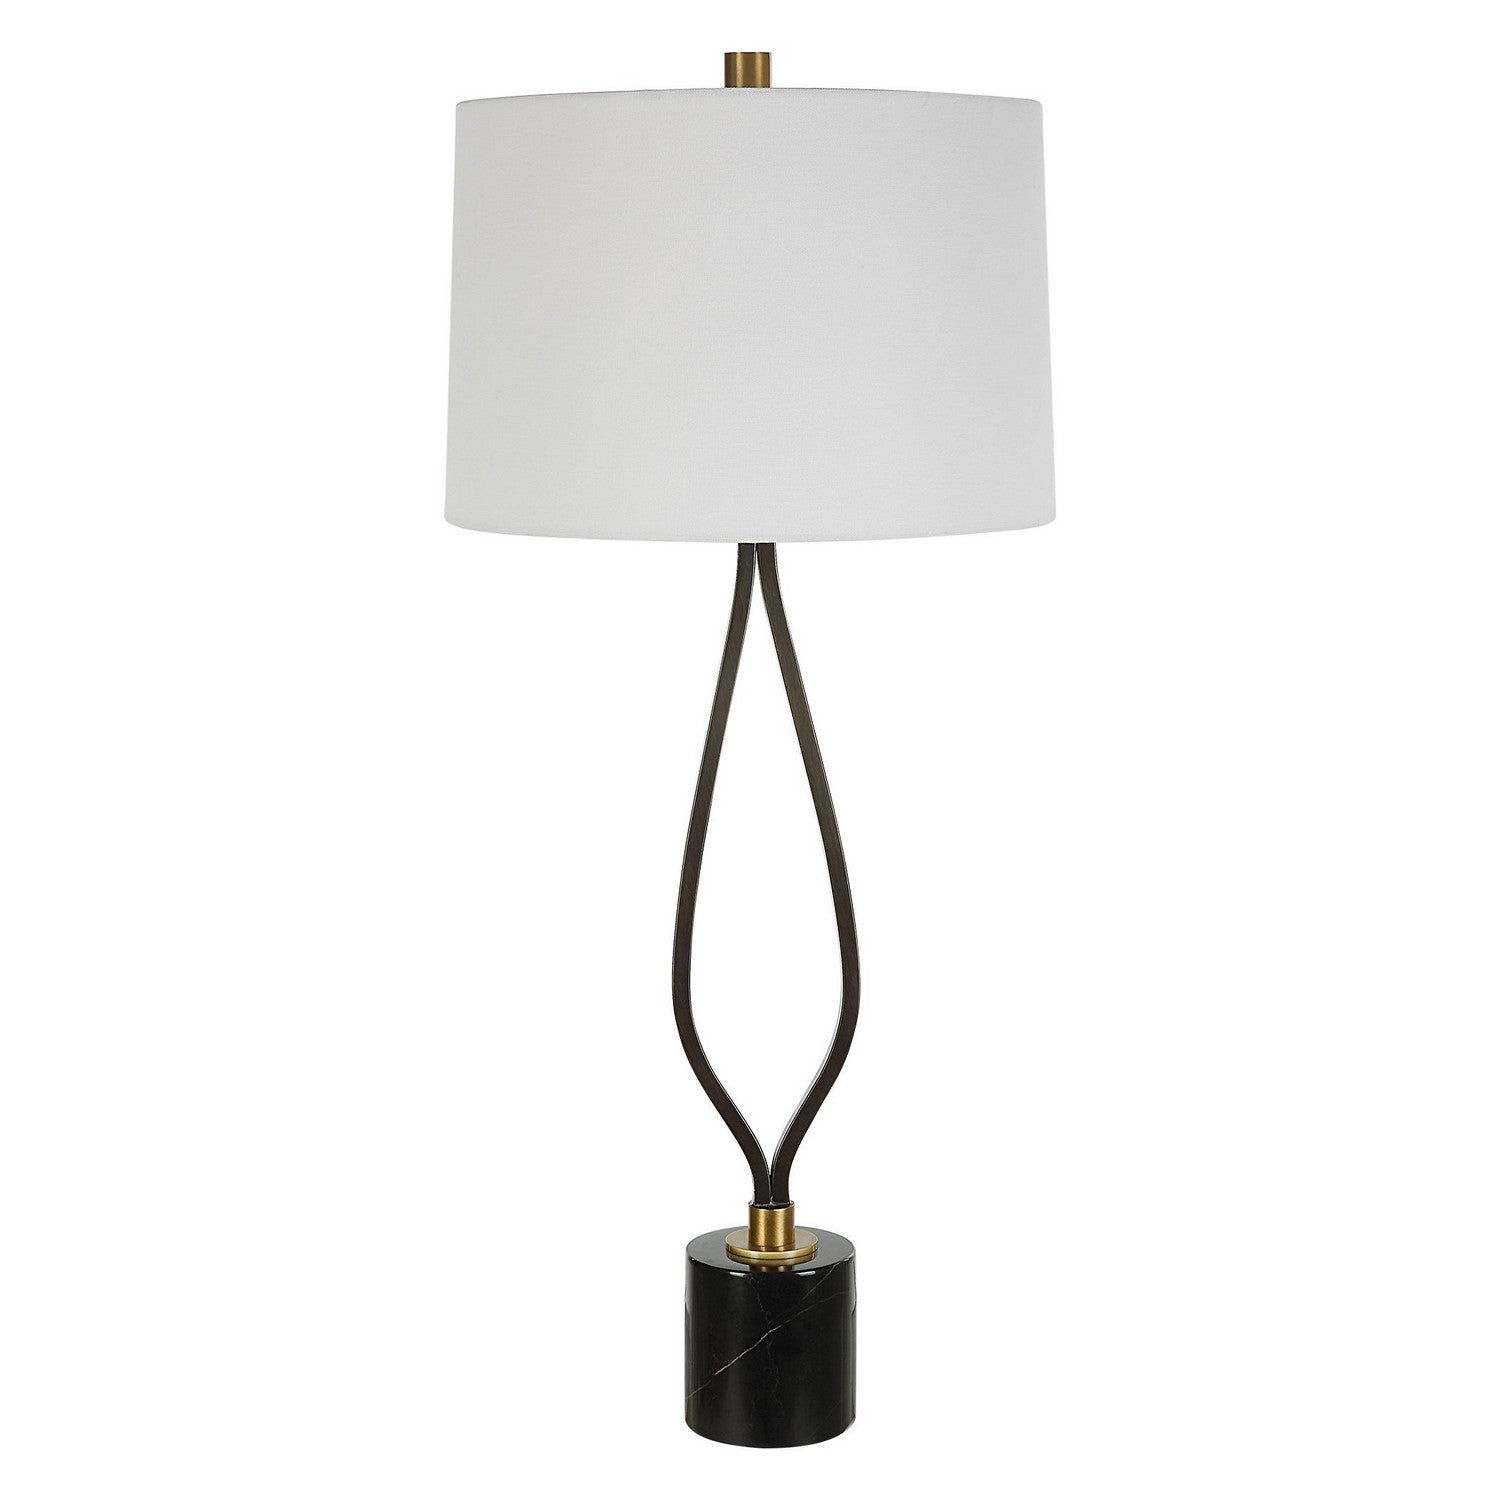 Uttermost - 30245 - One Light Table Lamp - Separate - Antique Brass